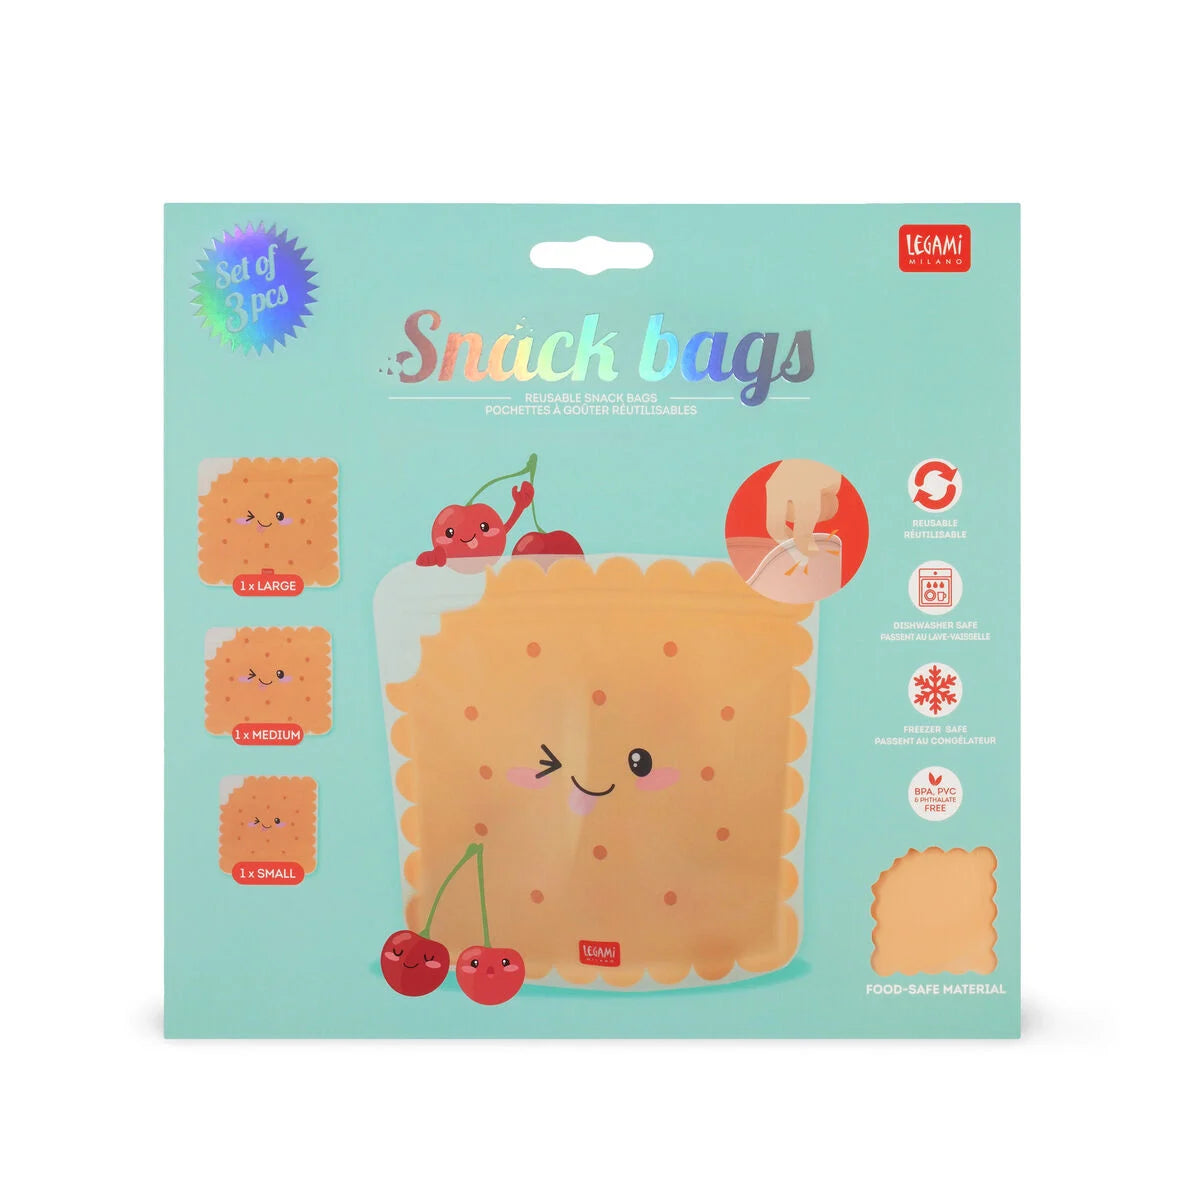 Fabulous Gifts Food Storage Legami Set Of 3 Reusable Food Pouches Cookie by Weirs of Baggot Street